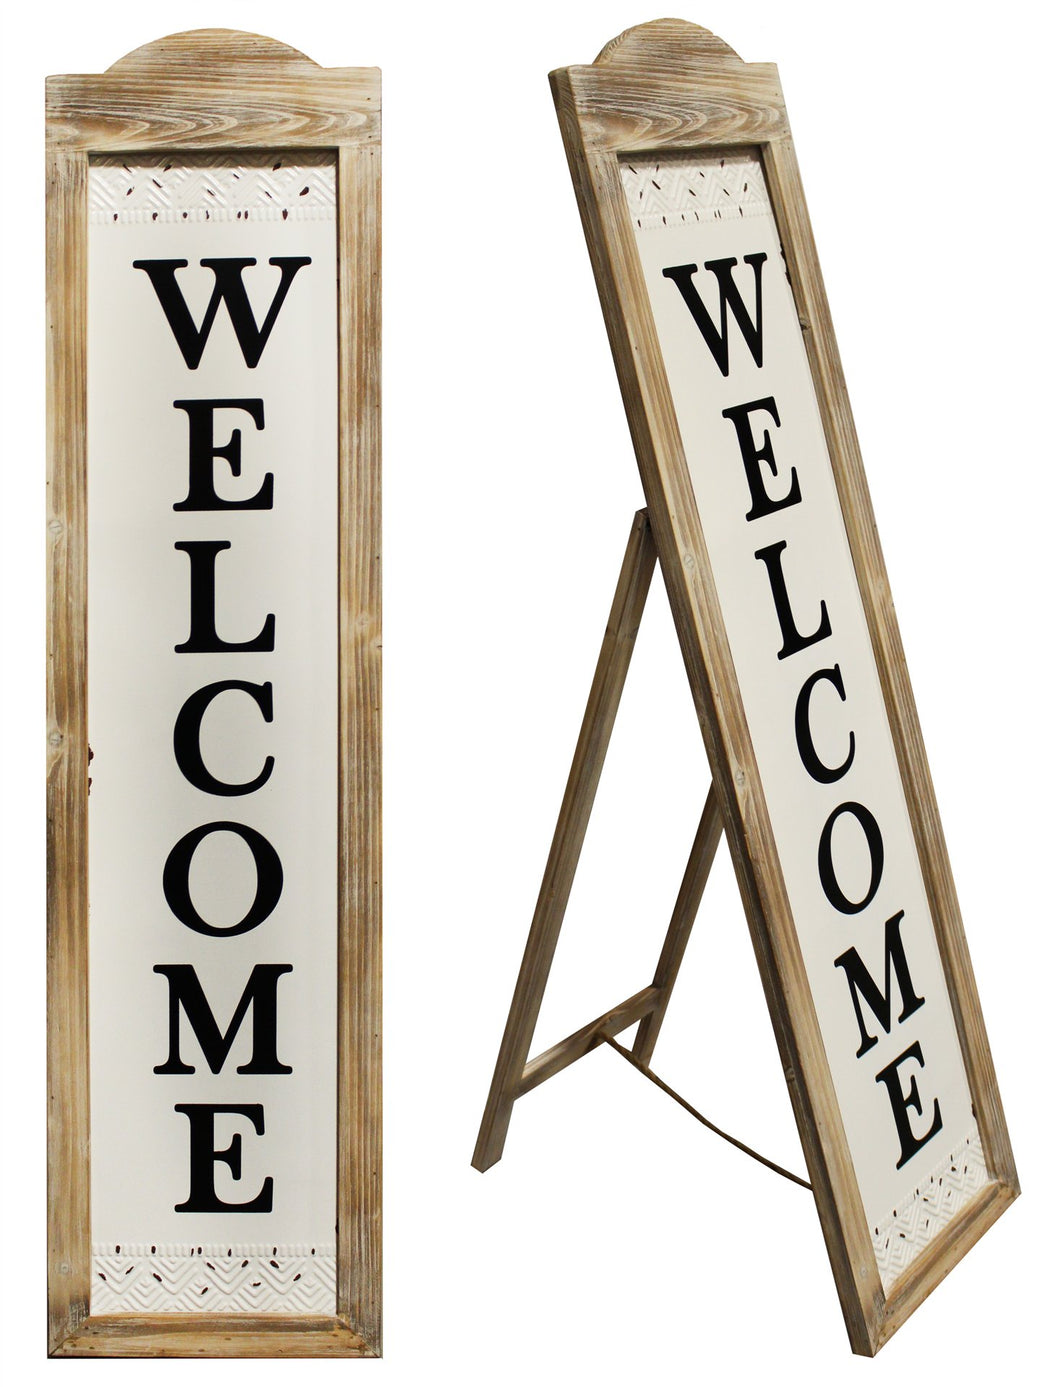 WELCOME SIGN EASEL